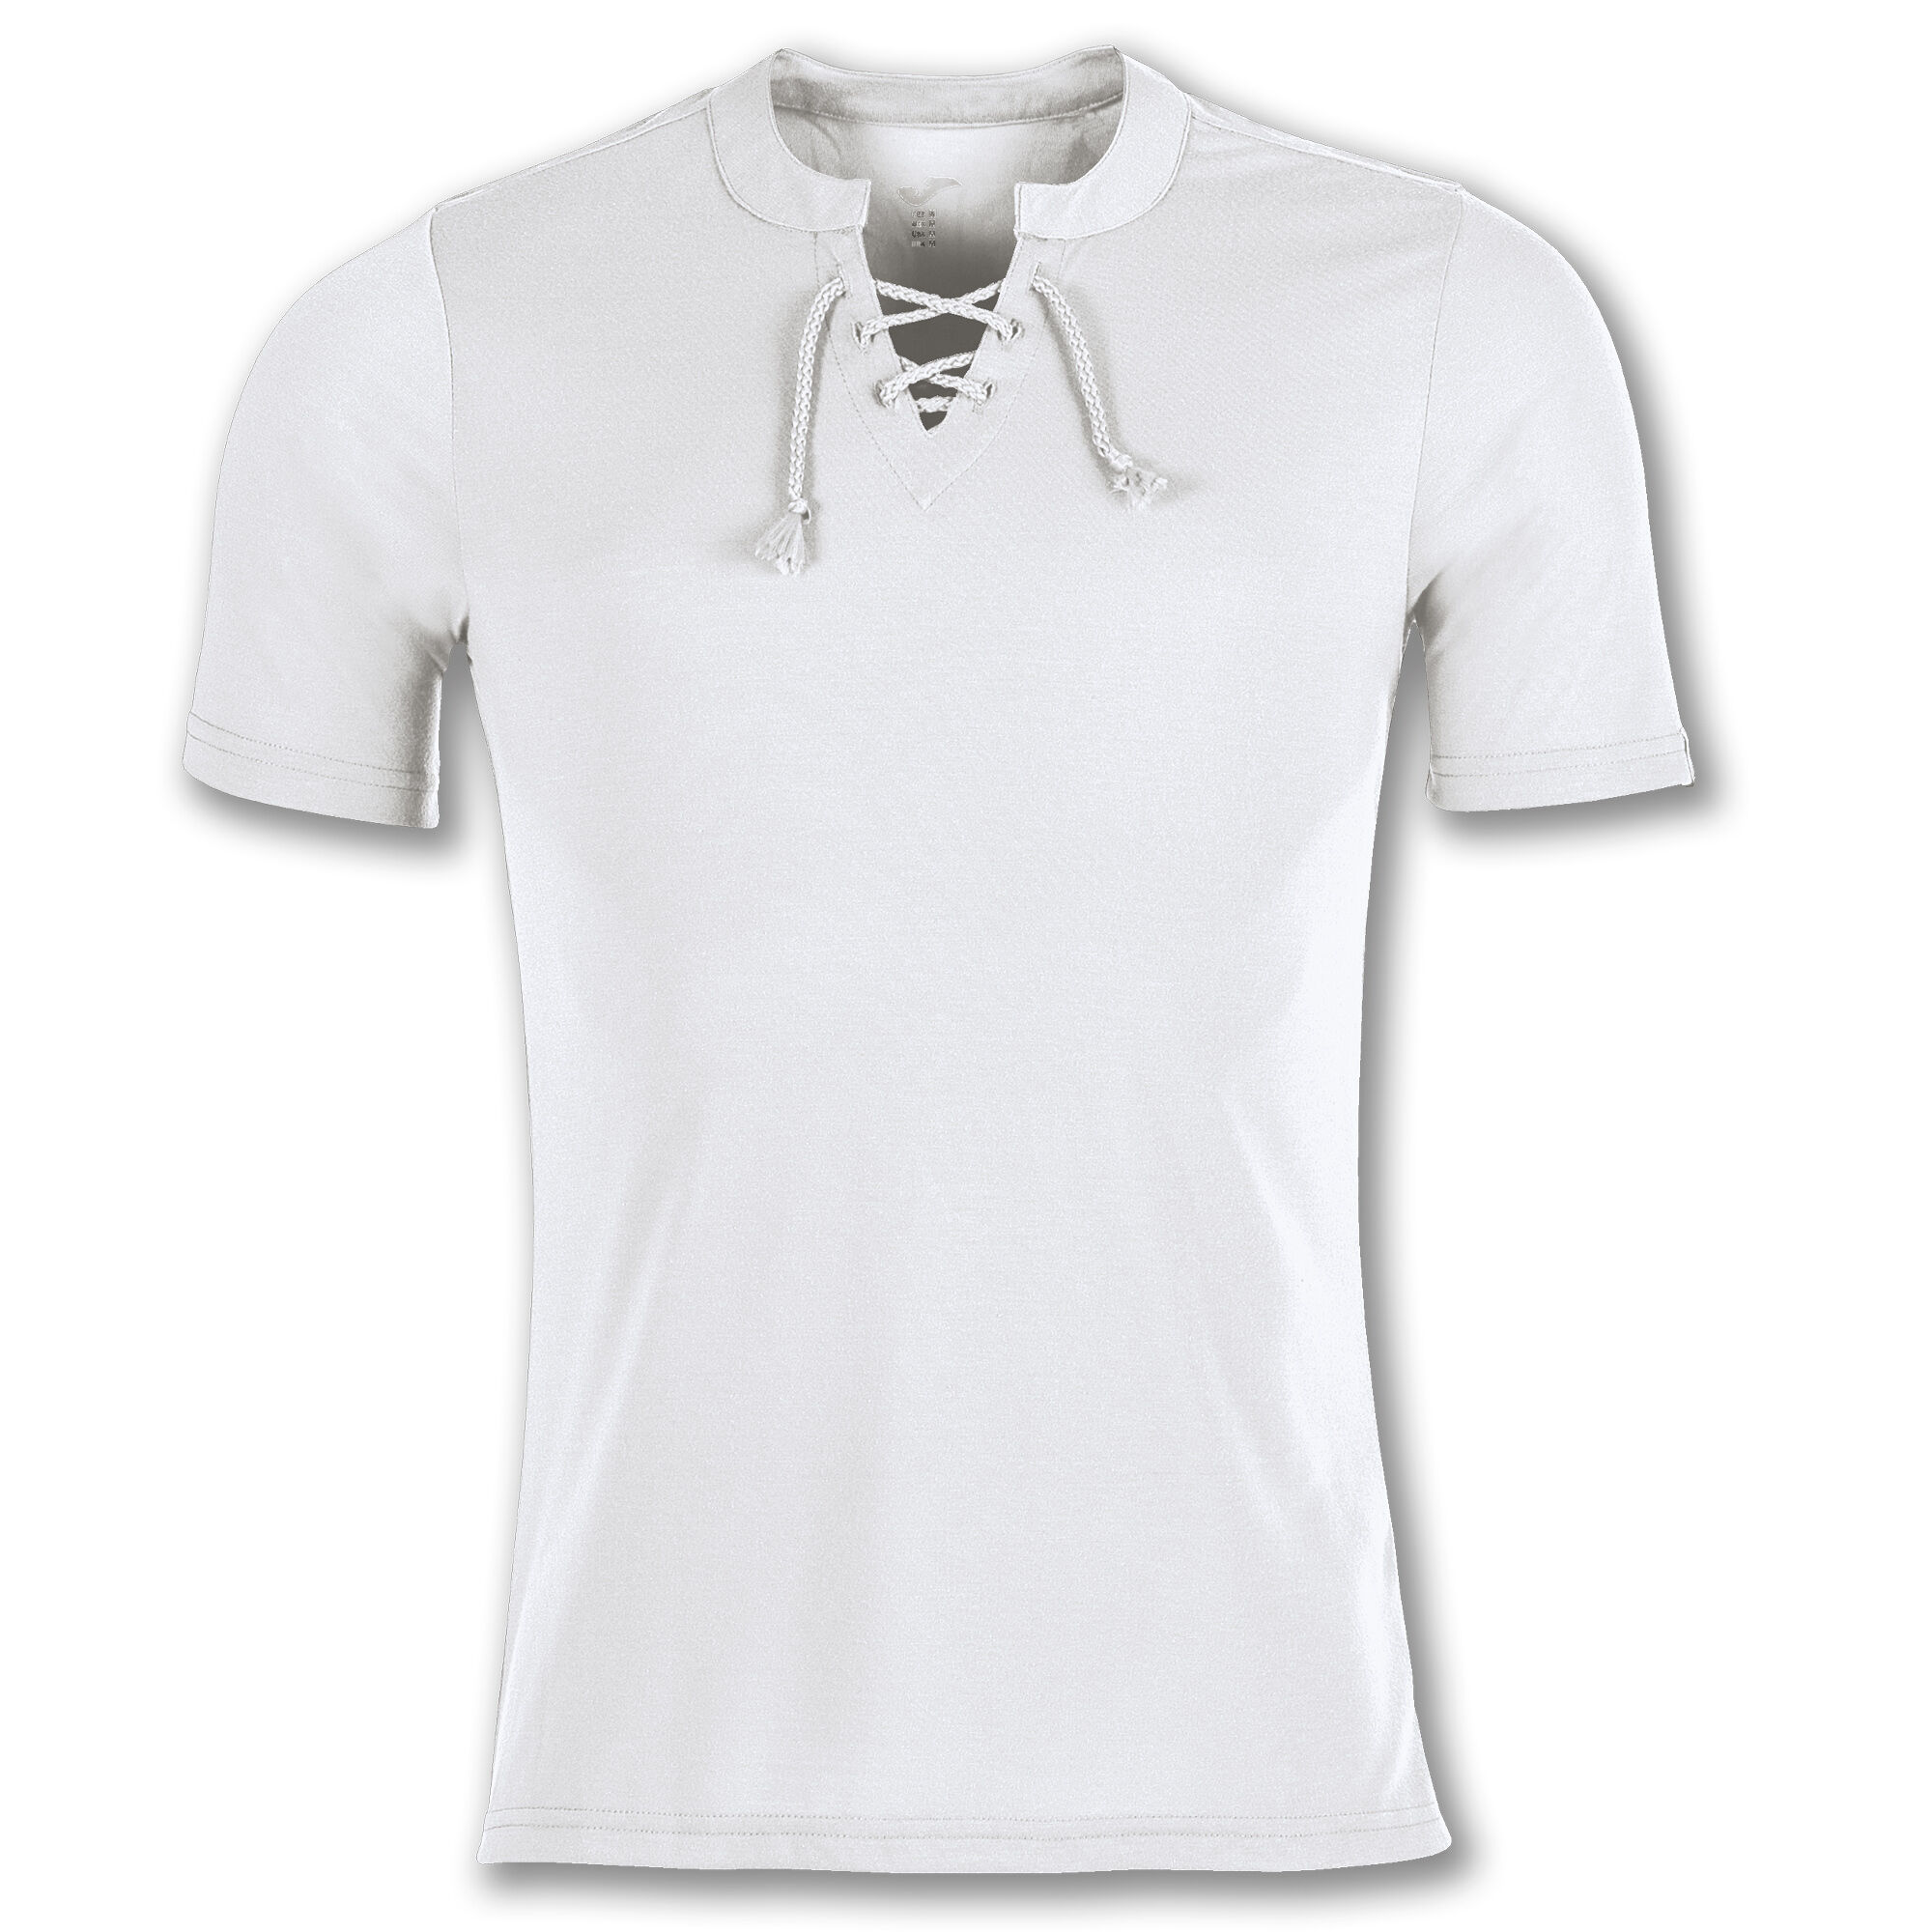 MAILLOT MANCHES COURTES HOMME 50Y BLANC